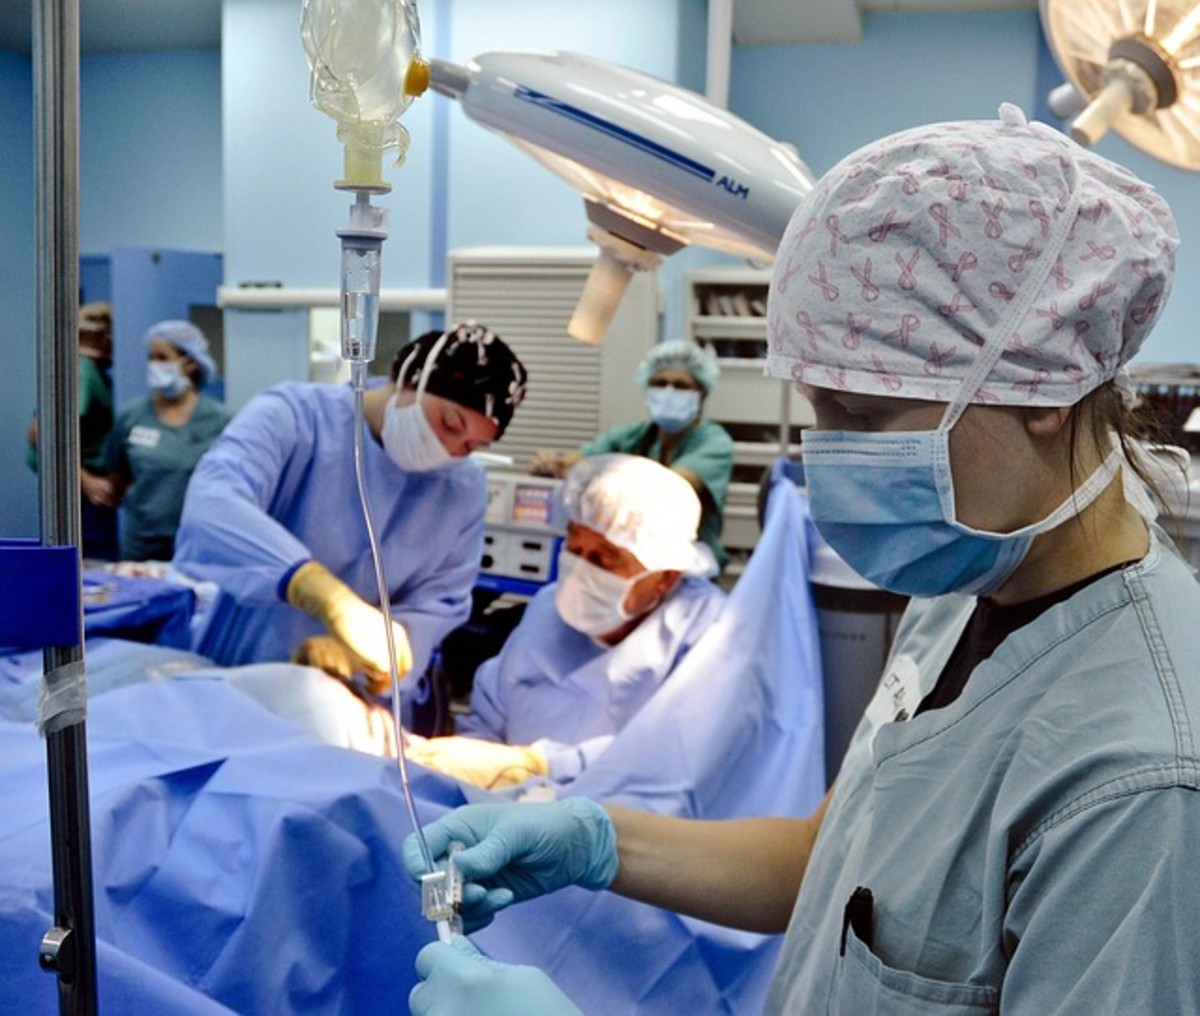 Will antibiotic resistant bacteria mean routine surgeries will become increasingly dangerous?